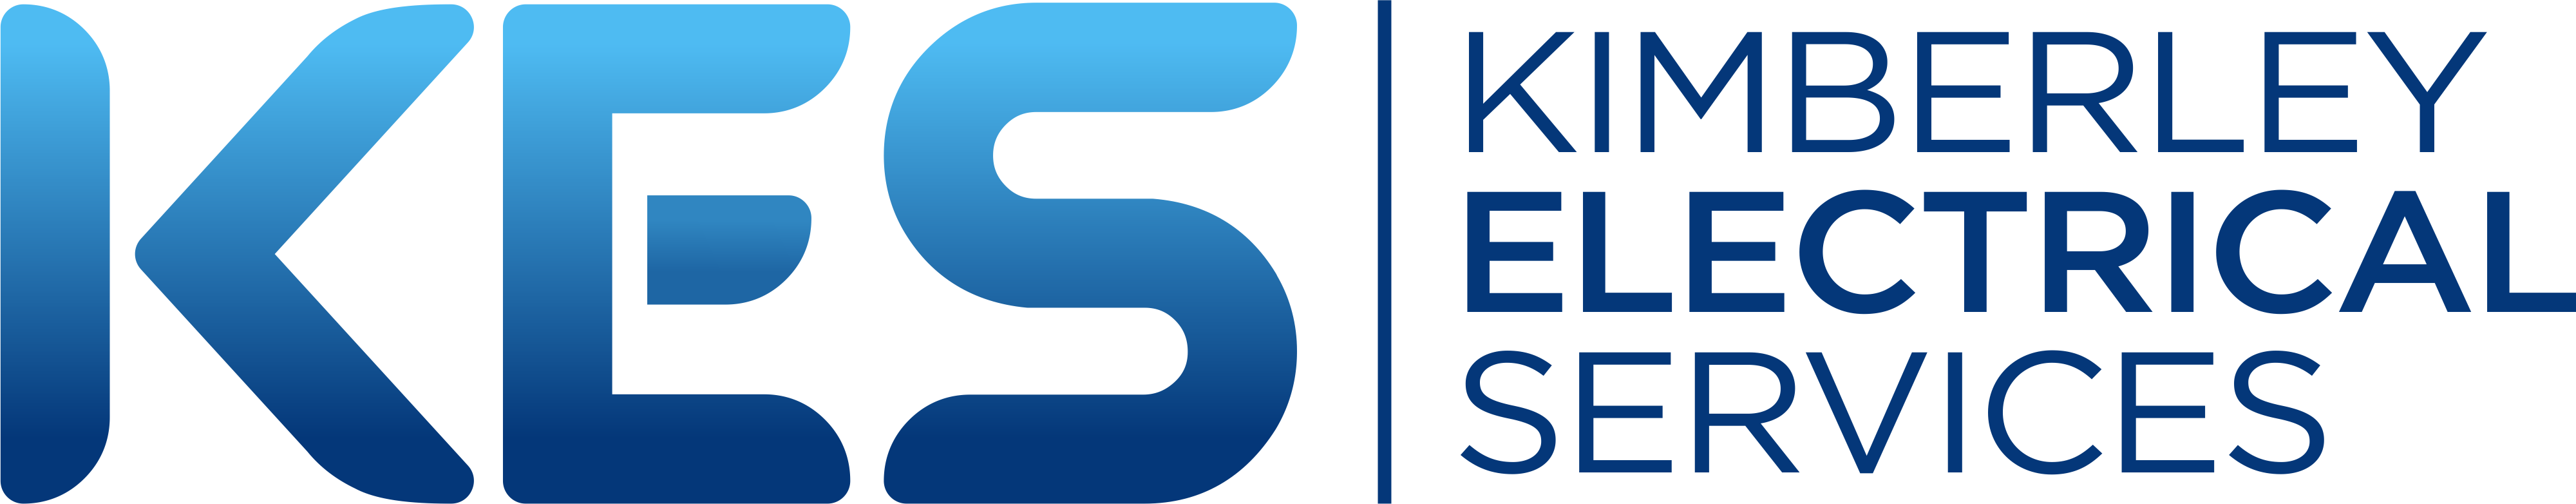 Kimberley Electrical Services Logo